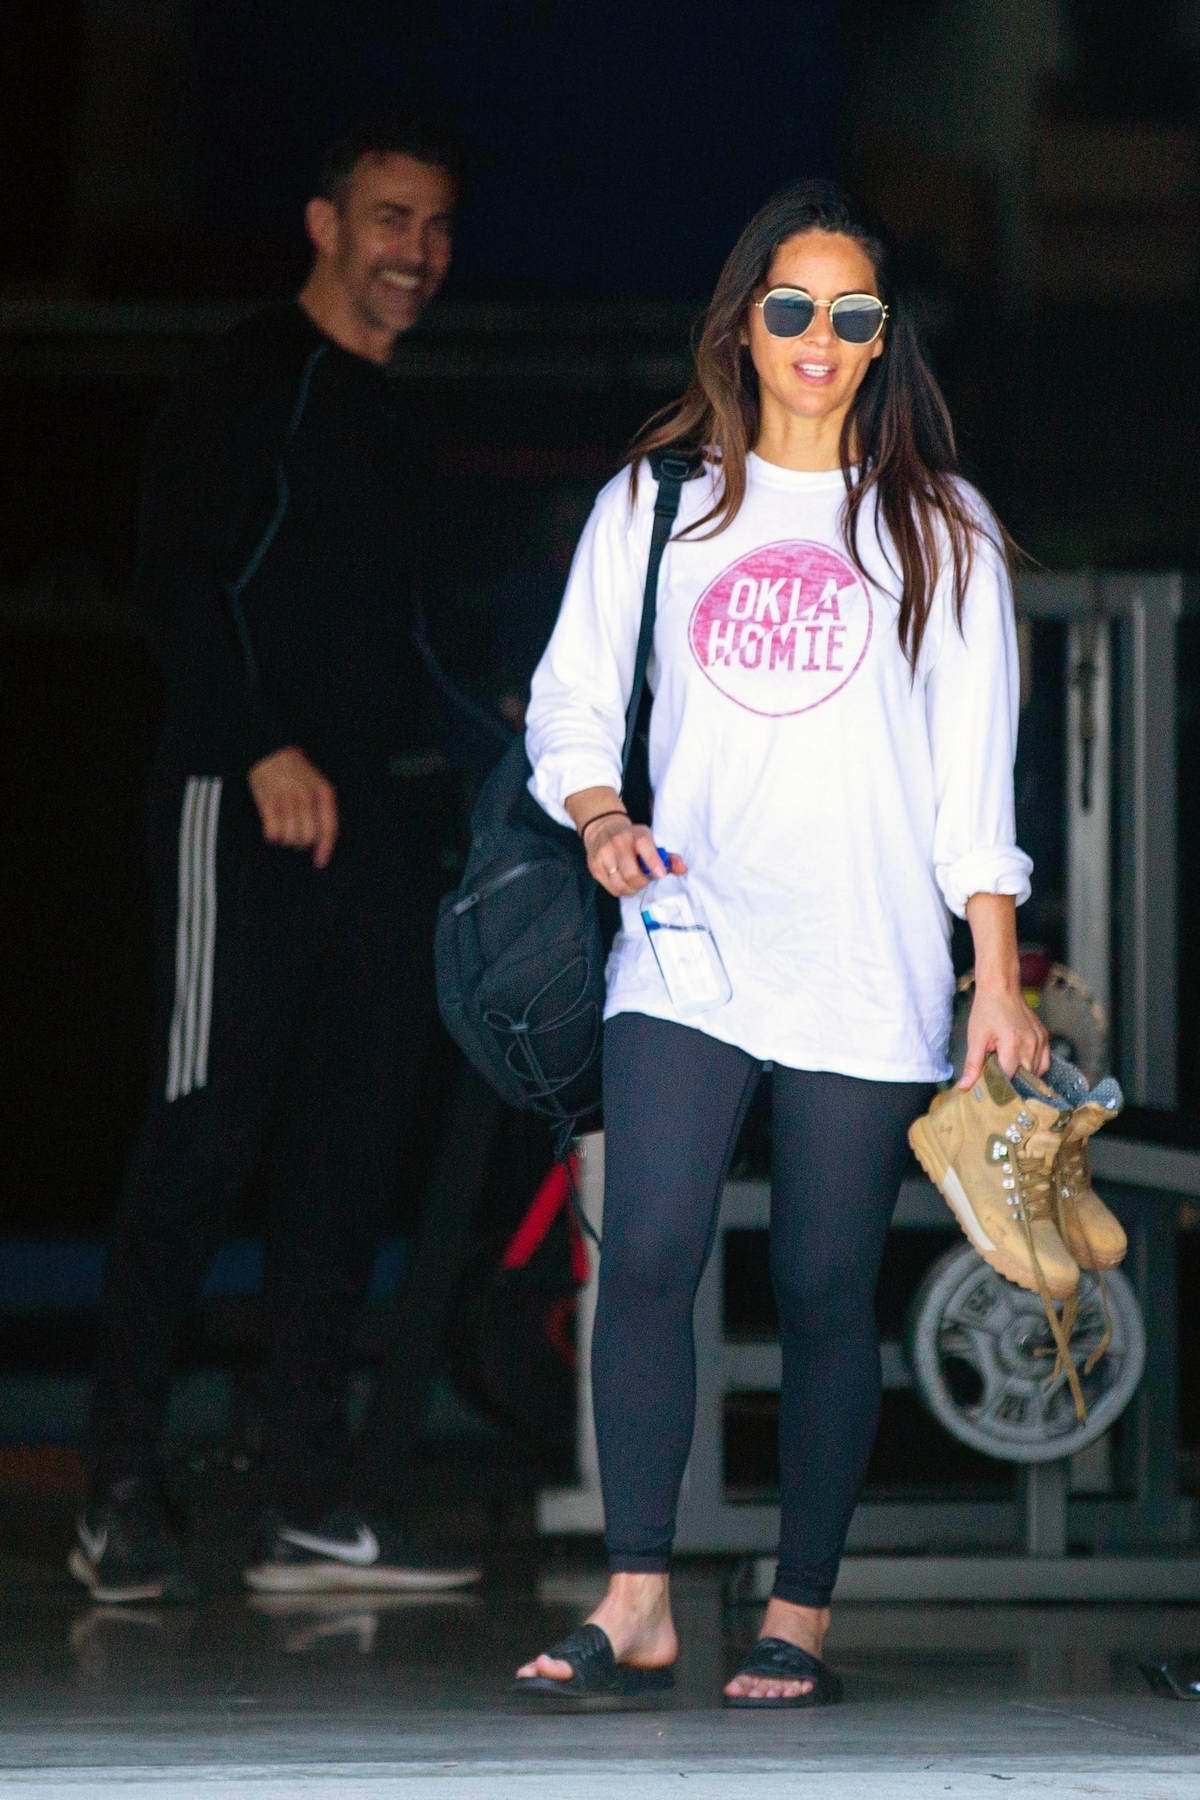 Olivia Munn Seen Leaving After A Workout Session At A Private Gym In